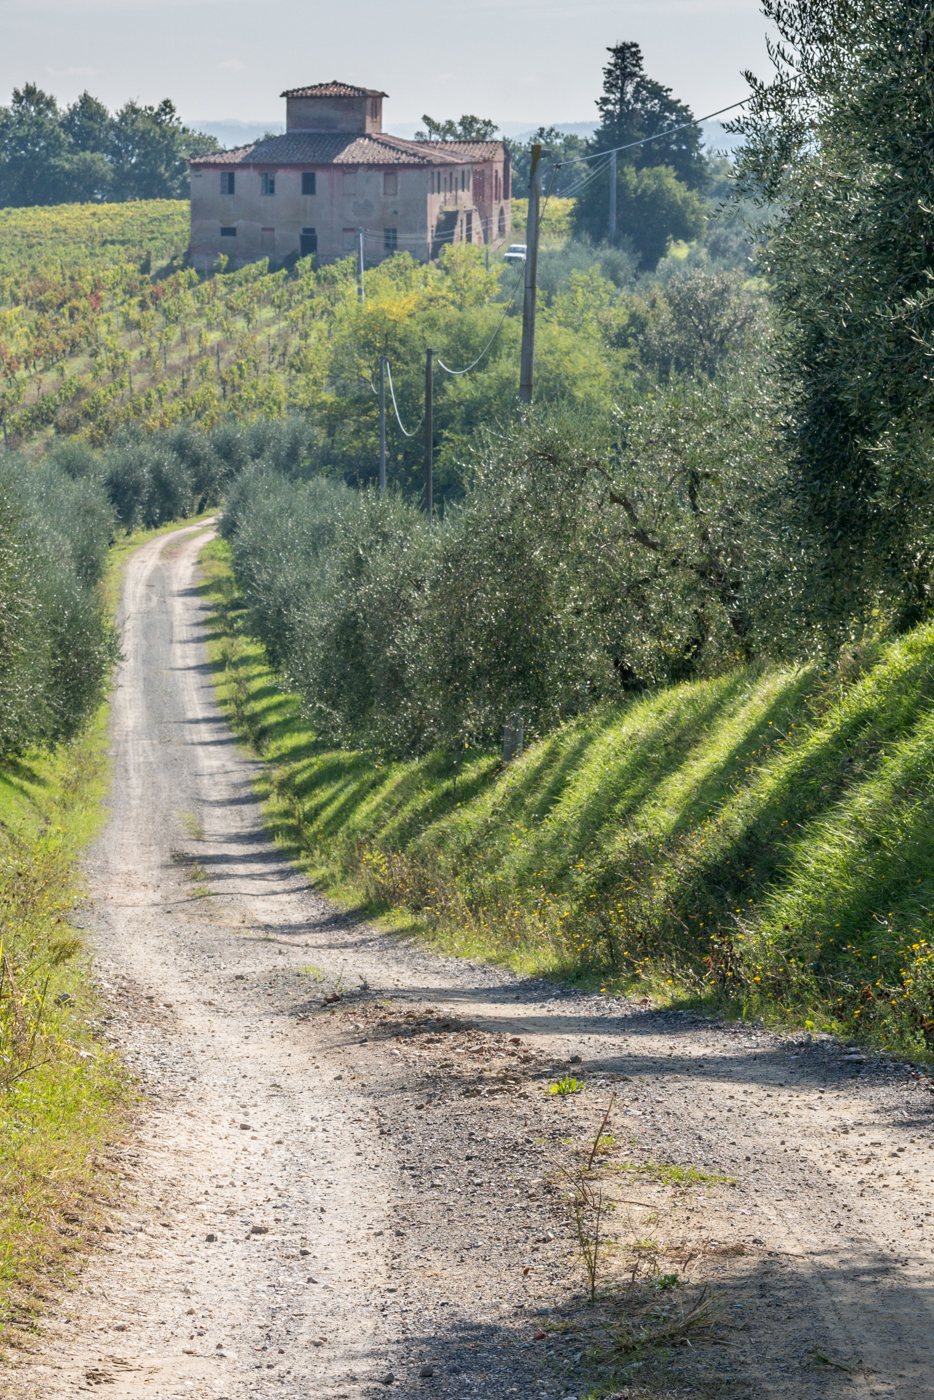 The Via Francigena in Tuscana approximately a three-and-a-quarter hour walk after departing San Miniato, Italy | Photo by Mike Hudak